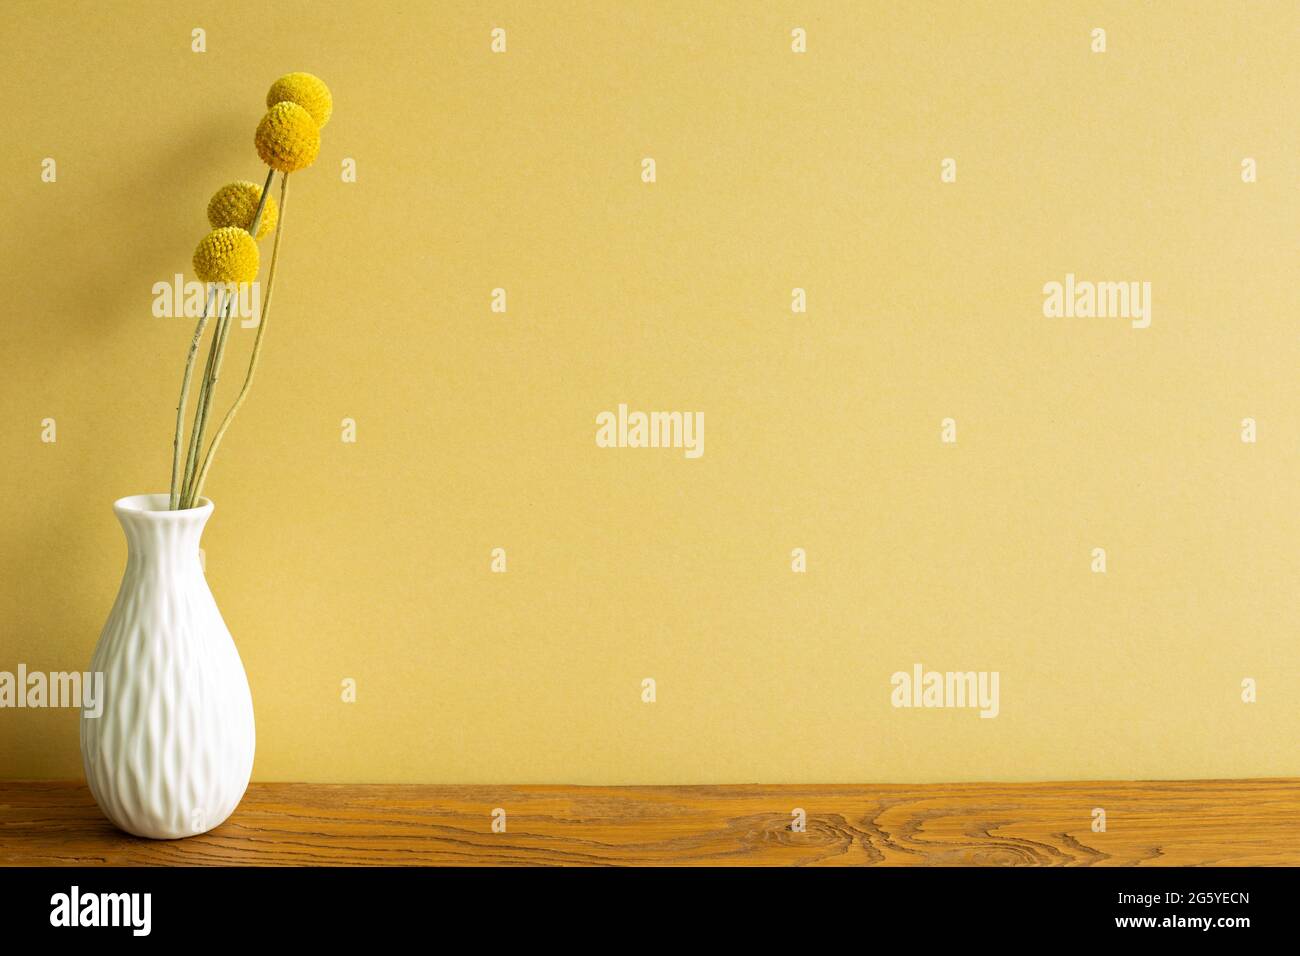 Vase of yellow Craspedia dry flowers on wooden table. yellow wall background. home interior Stock Photo